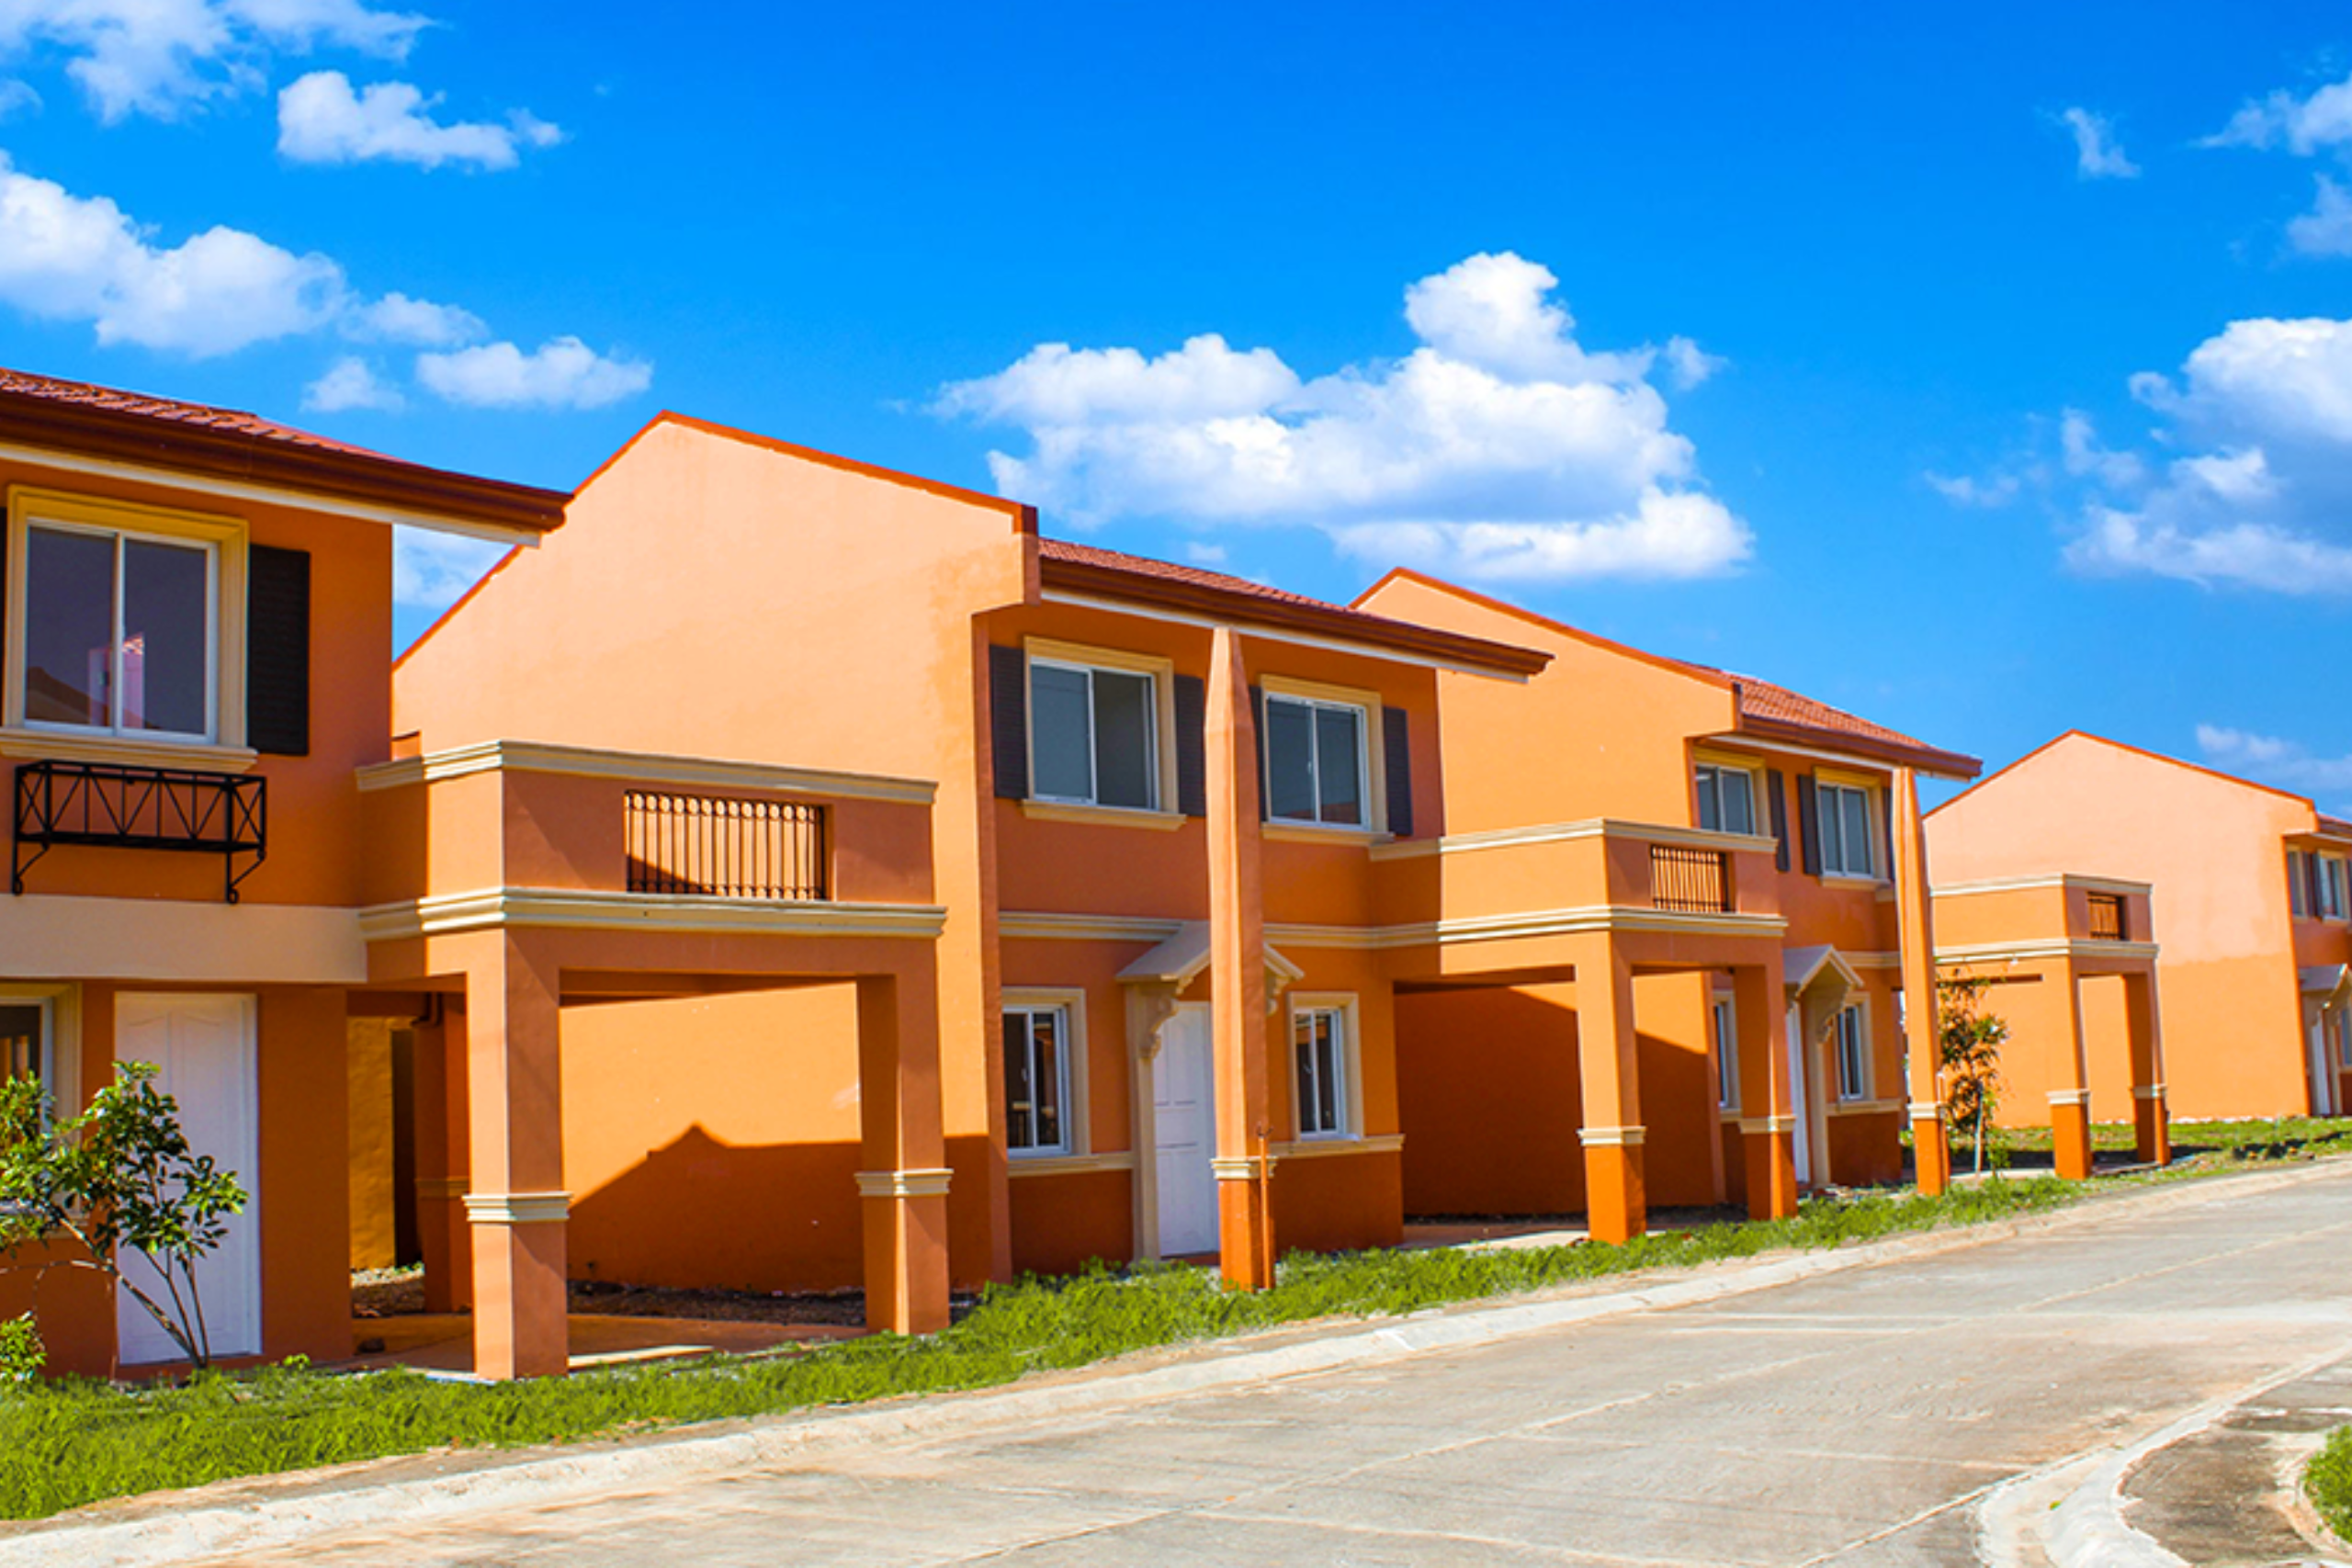 Real Estate Investments as Income Replacement for OFWs